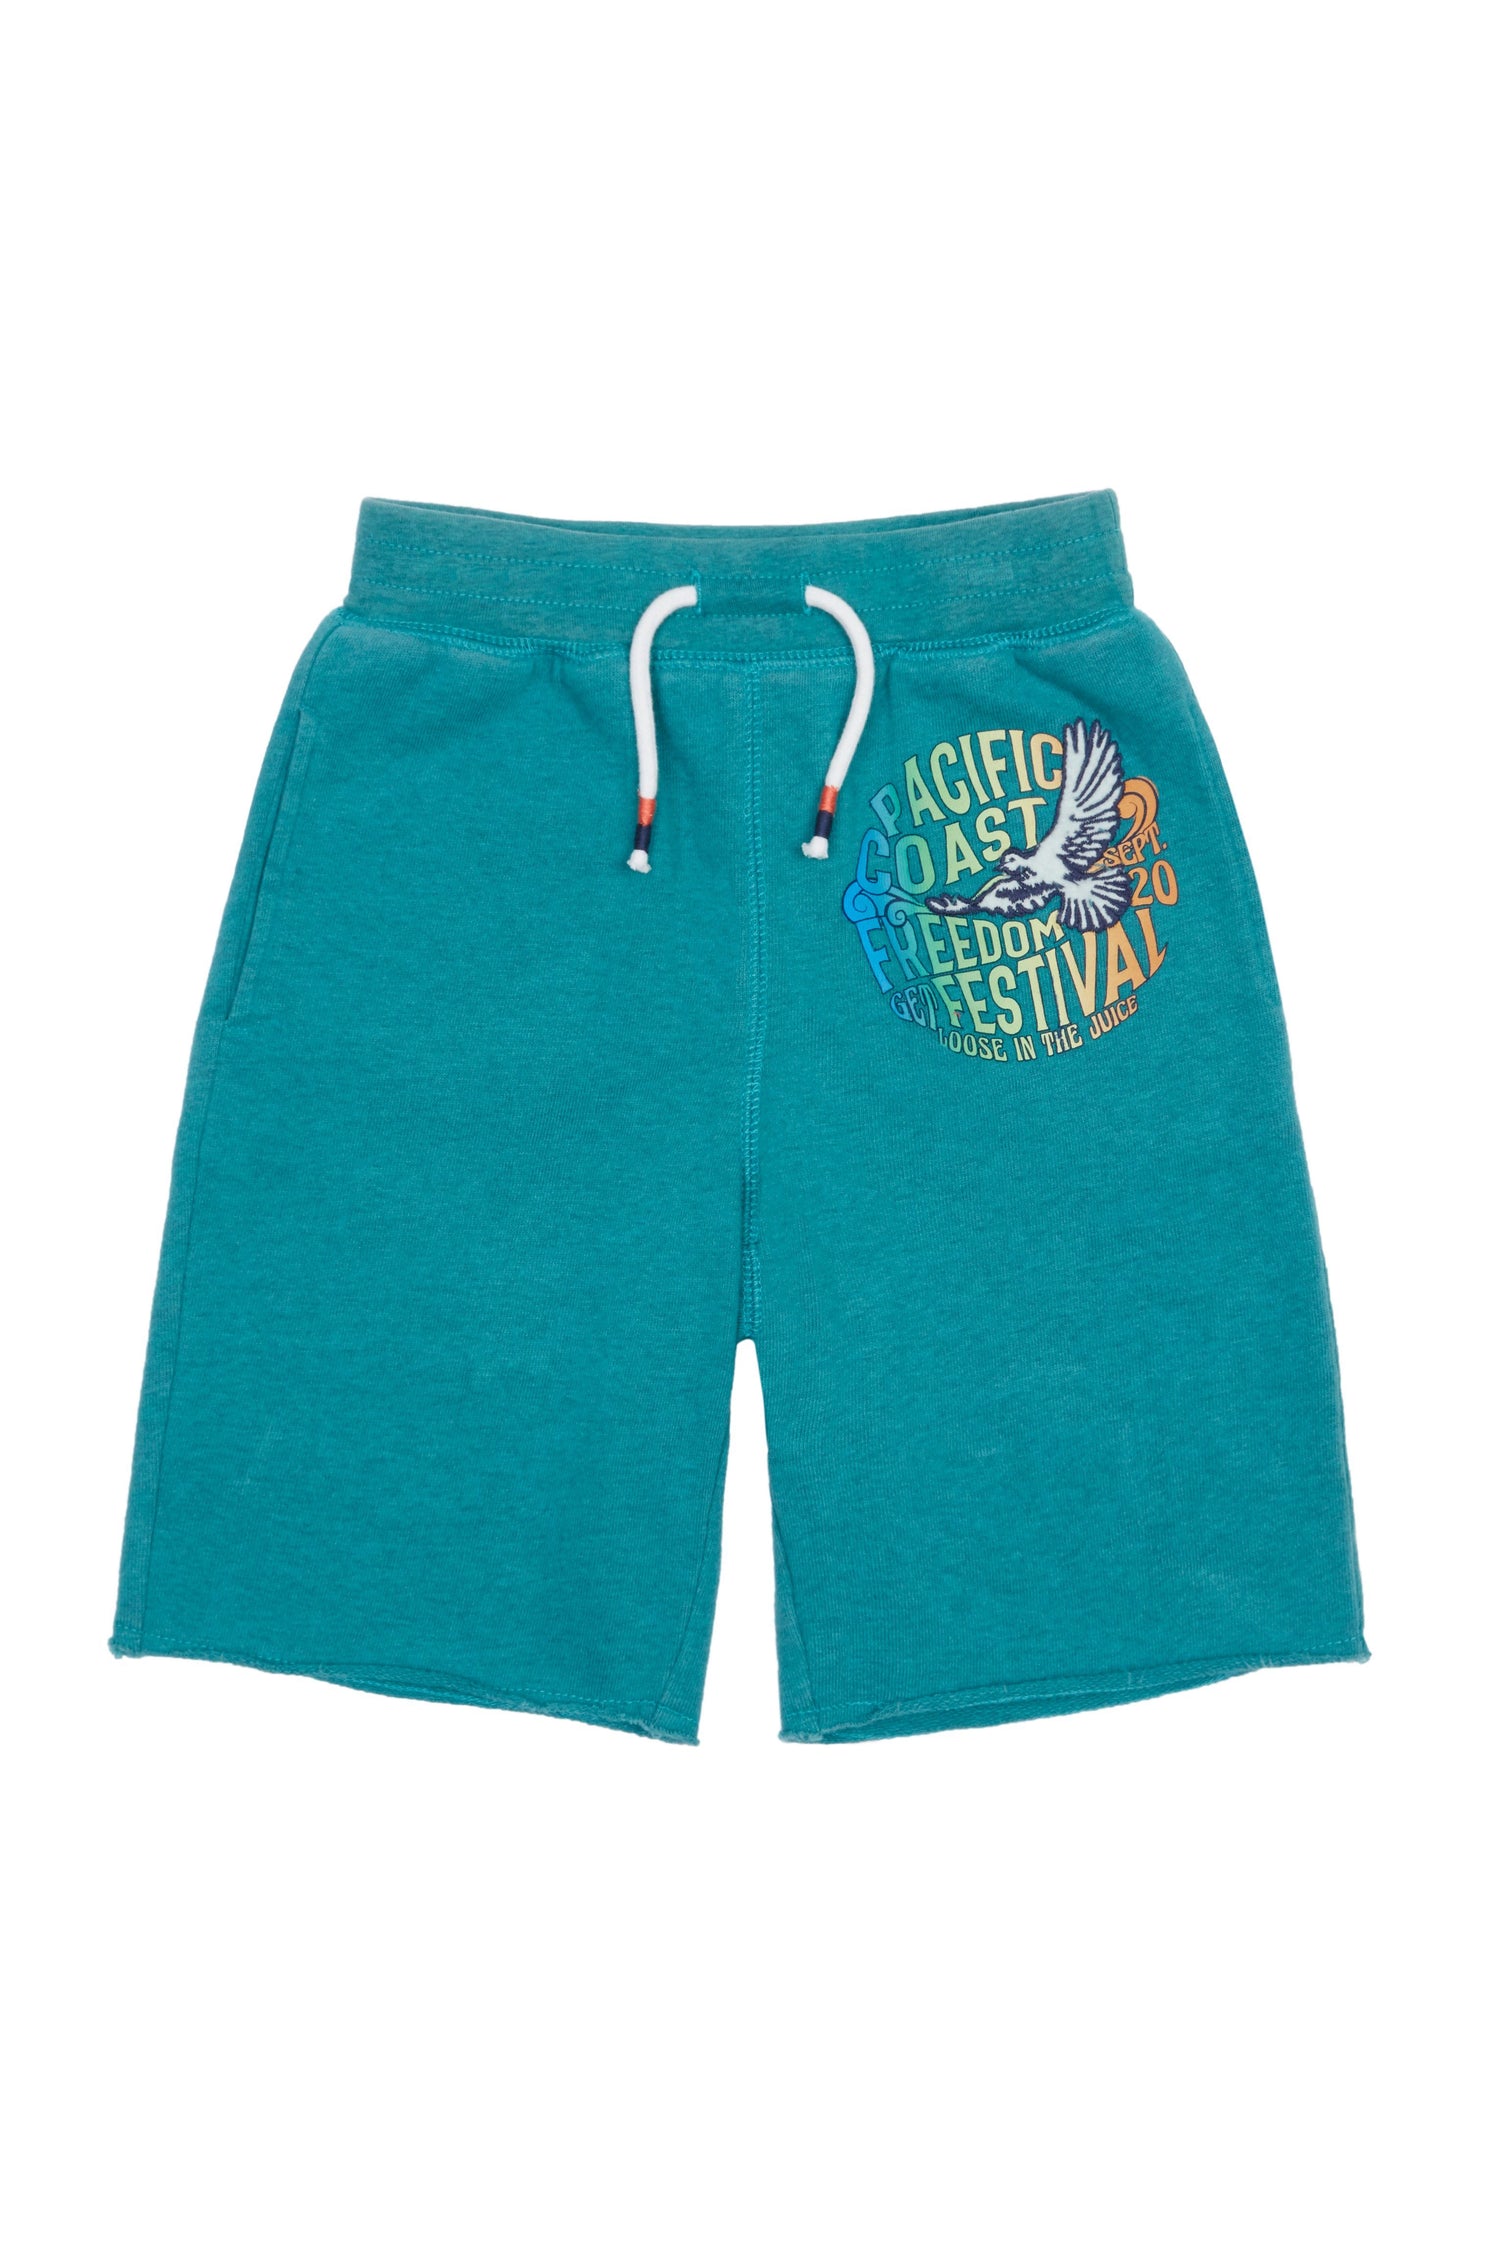 Teal-colored, elastic waist knit shorts with graphic of  flying bird and words Pacific Coast Freedom Festival.